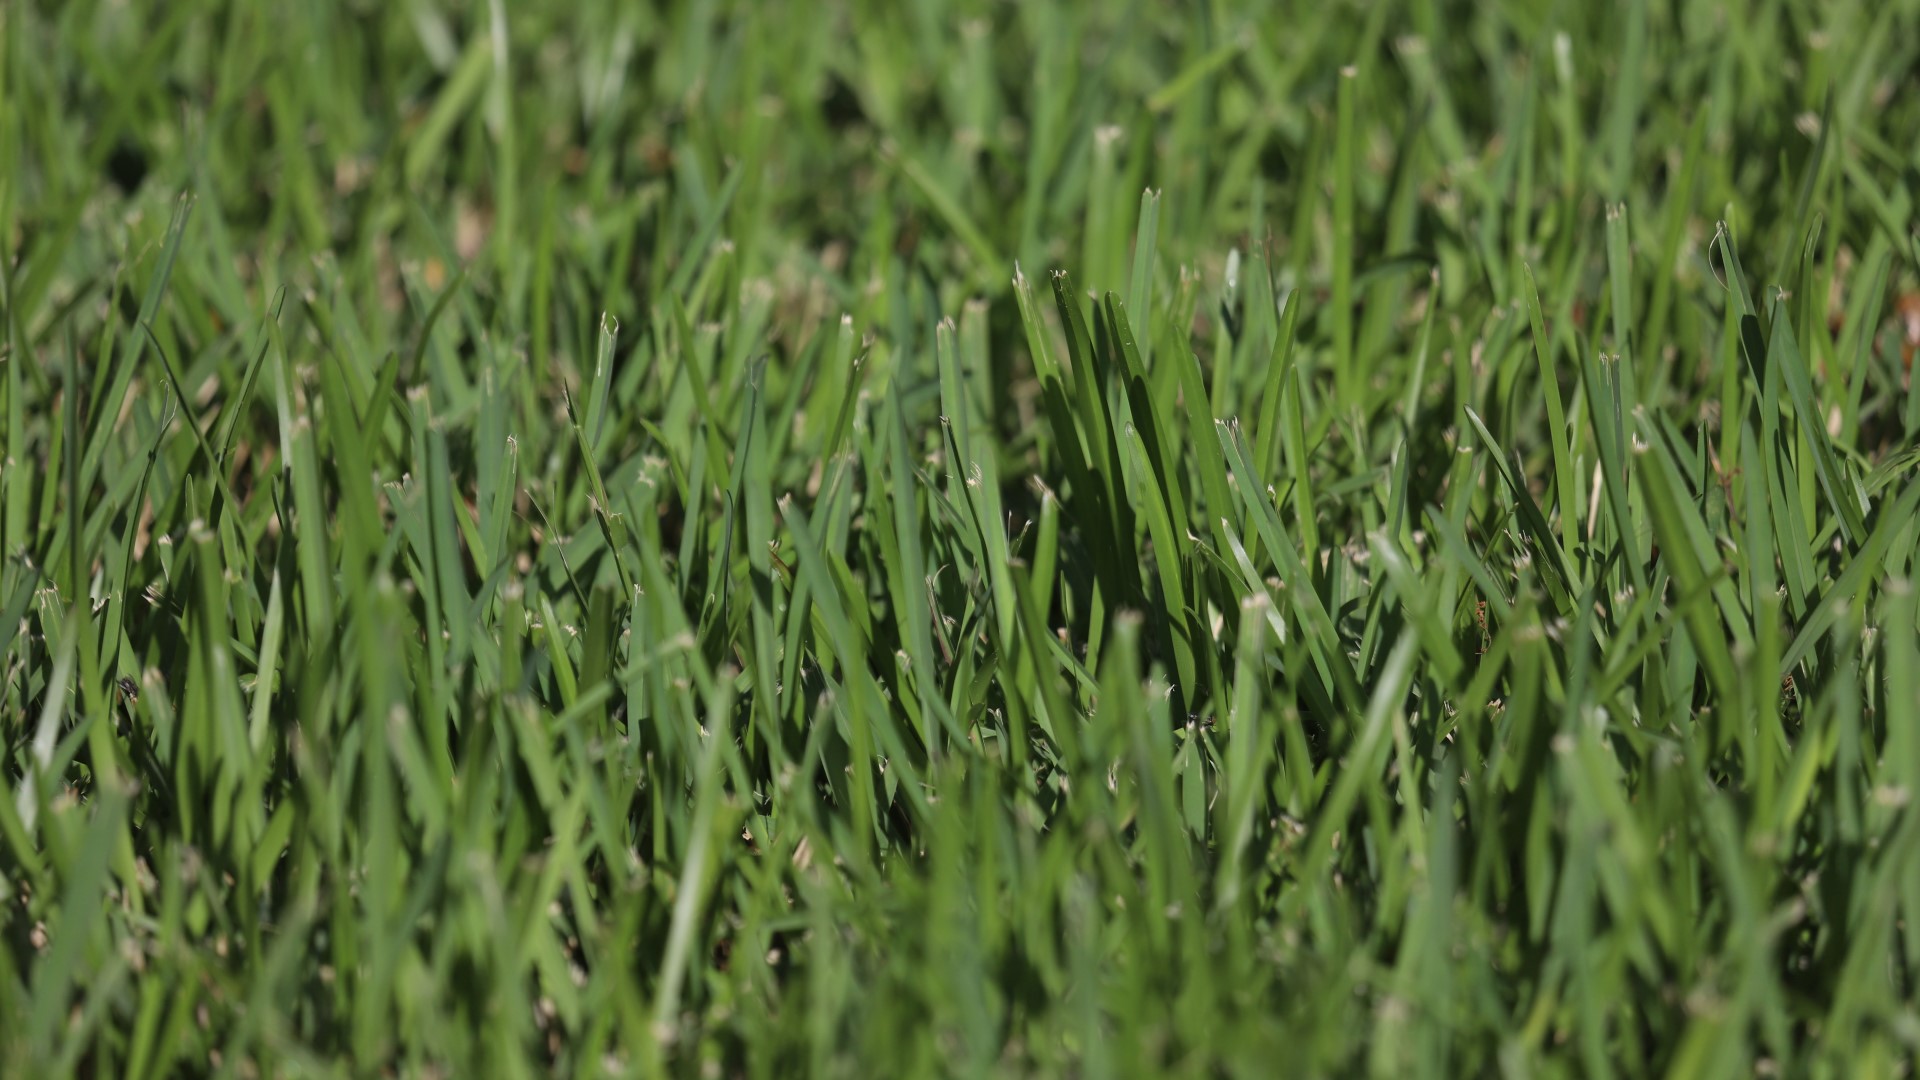 St. Augustine grass is a thick warm-season turfgrass used in moist tropical and semi-tropical locations, where it grows in thick mats that exclude weeds.